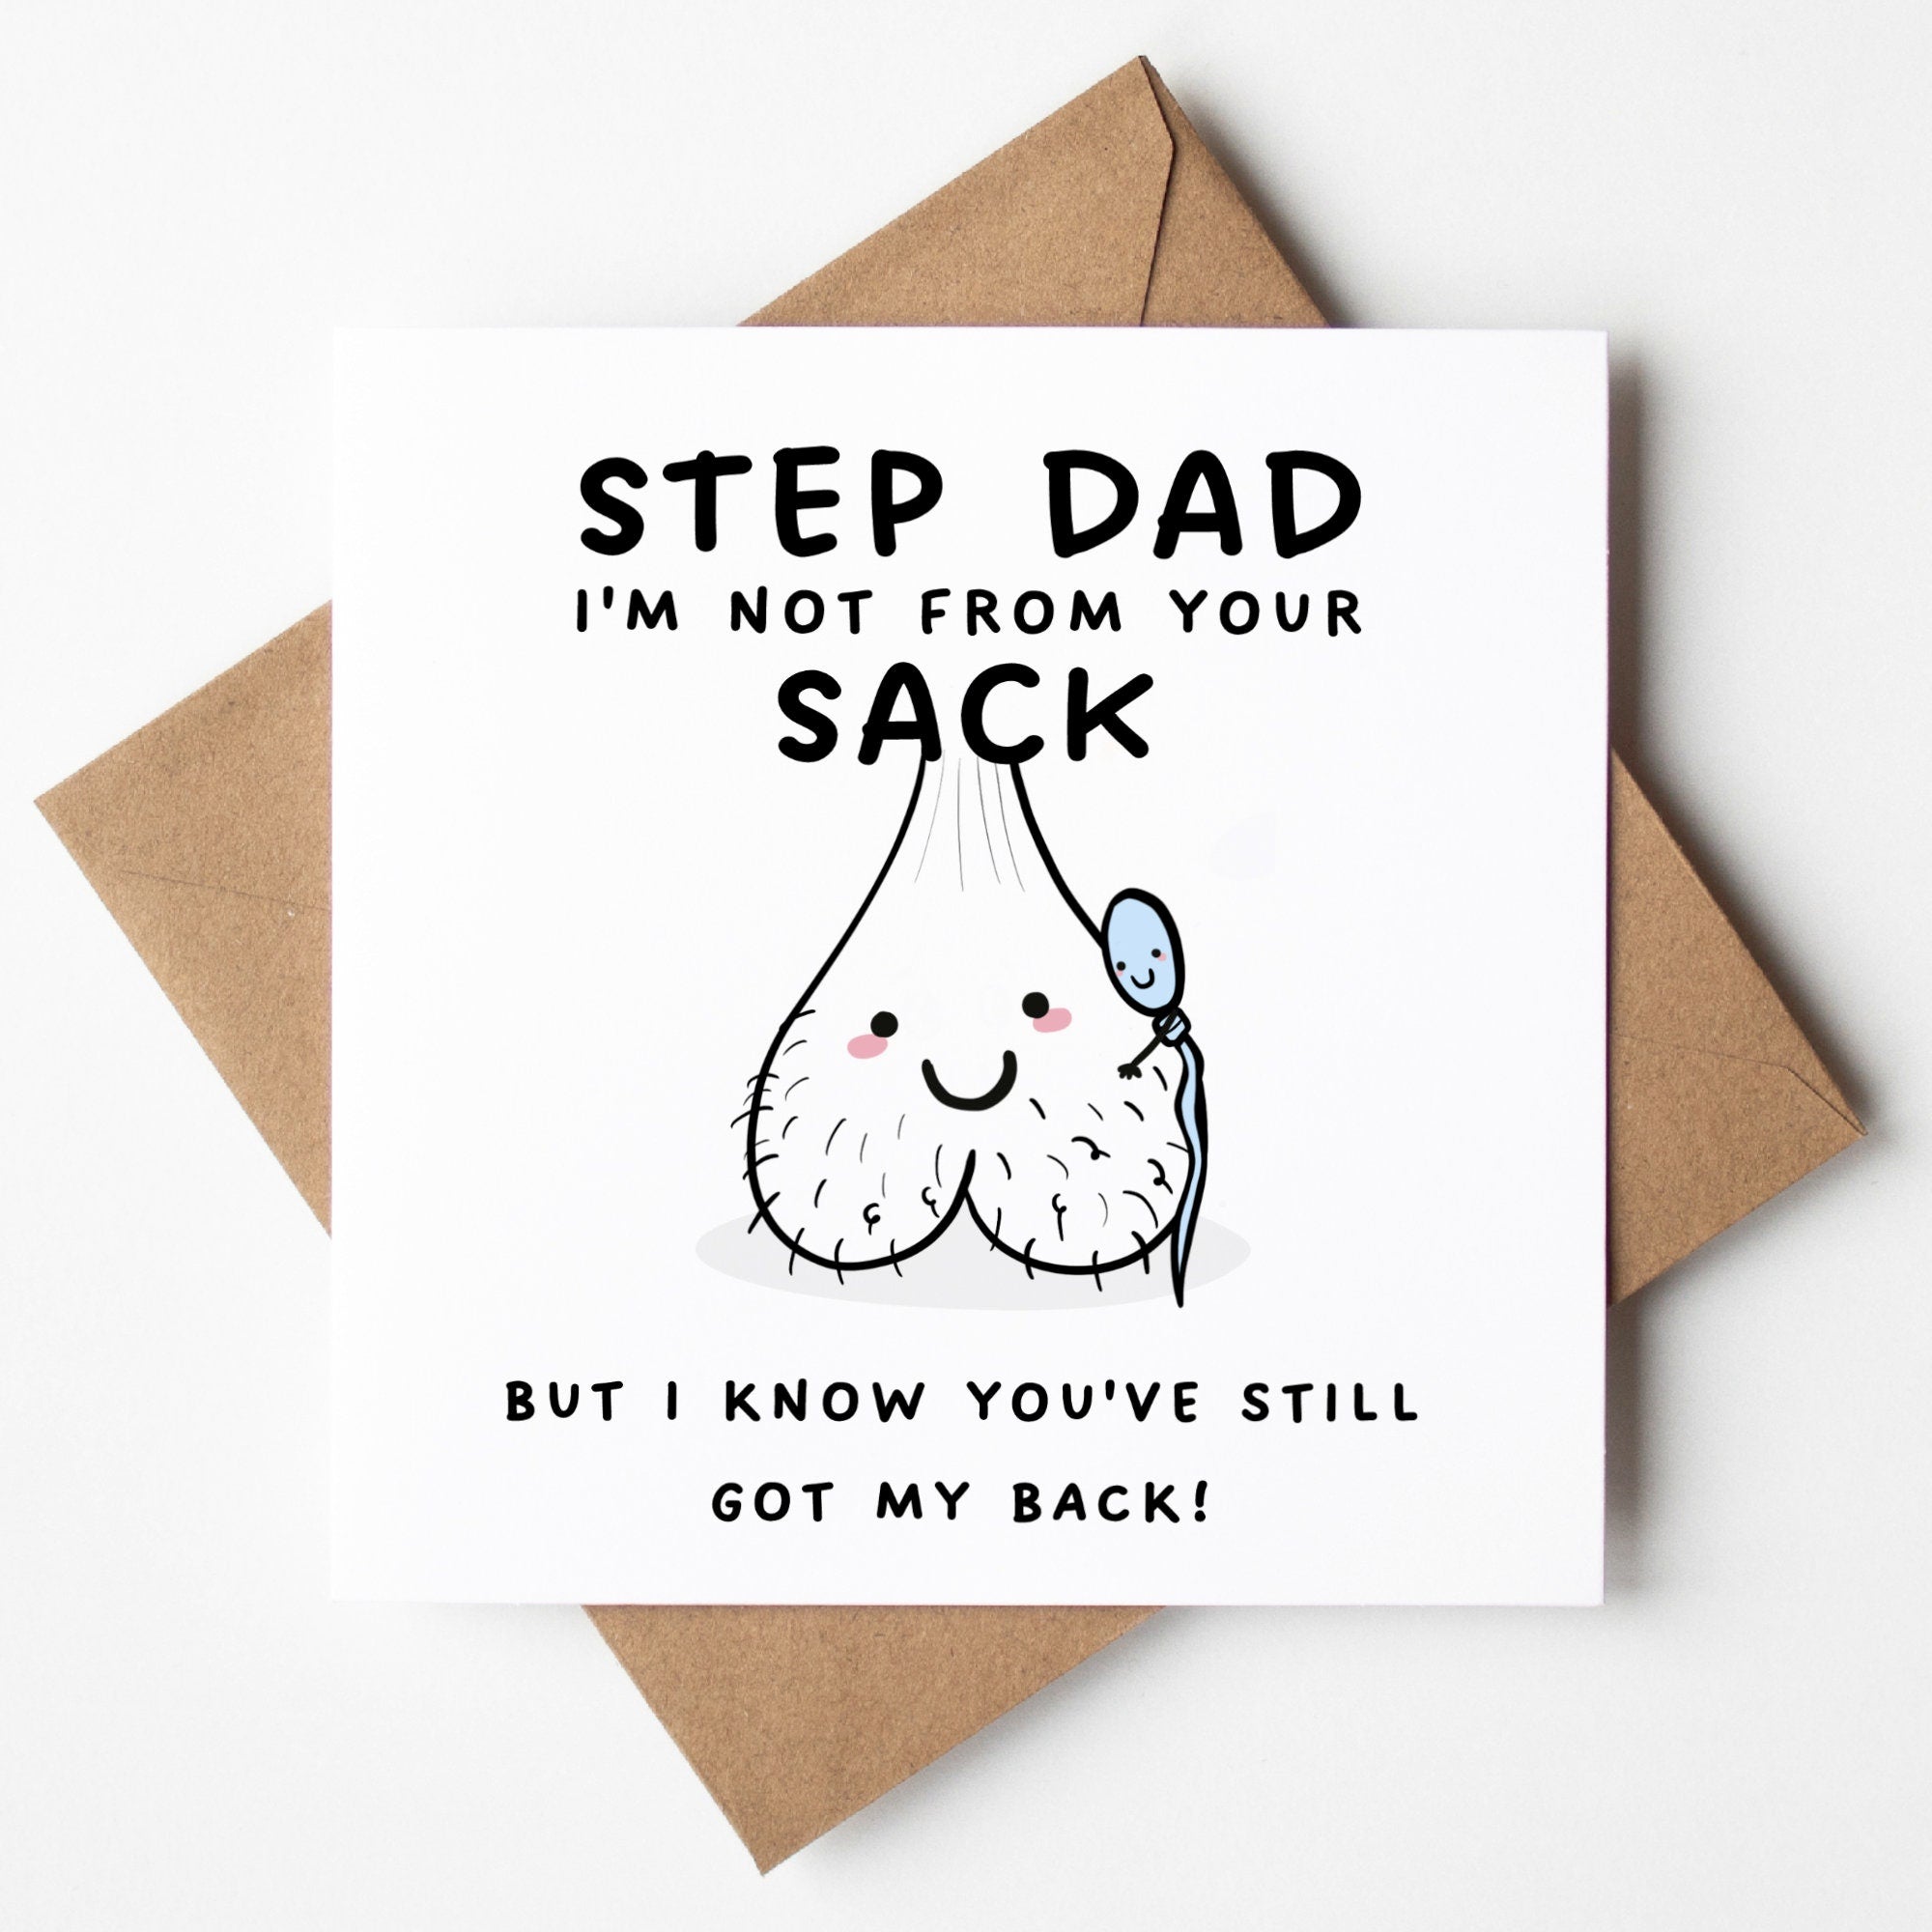 Not From Your Sack, Step Dad Fathers Day Card,  Gifts For Step Dads, Funny Fathers Day Card, Cute Fathers Day Cards, Funny Step Dad Cards